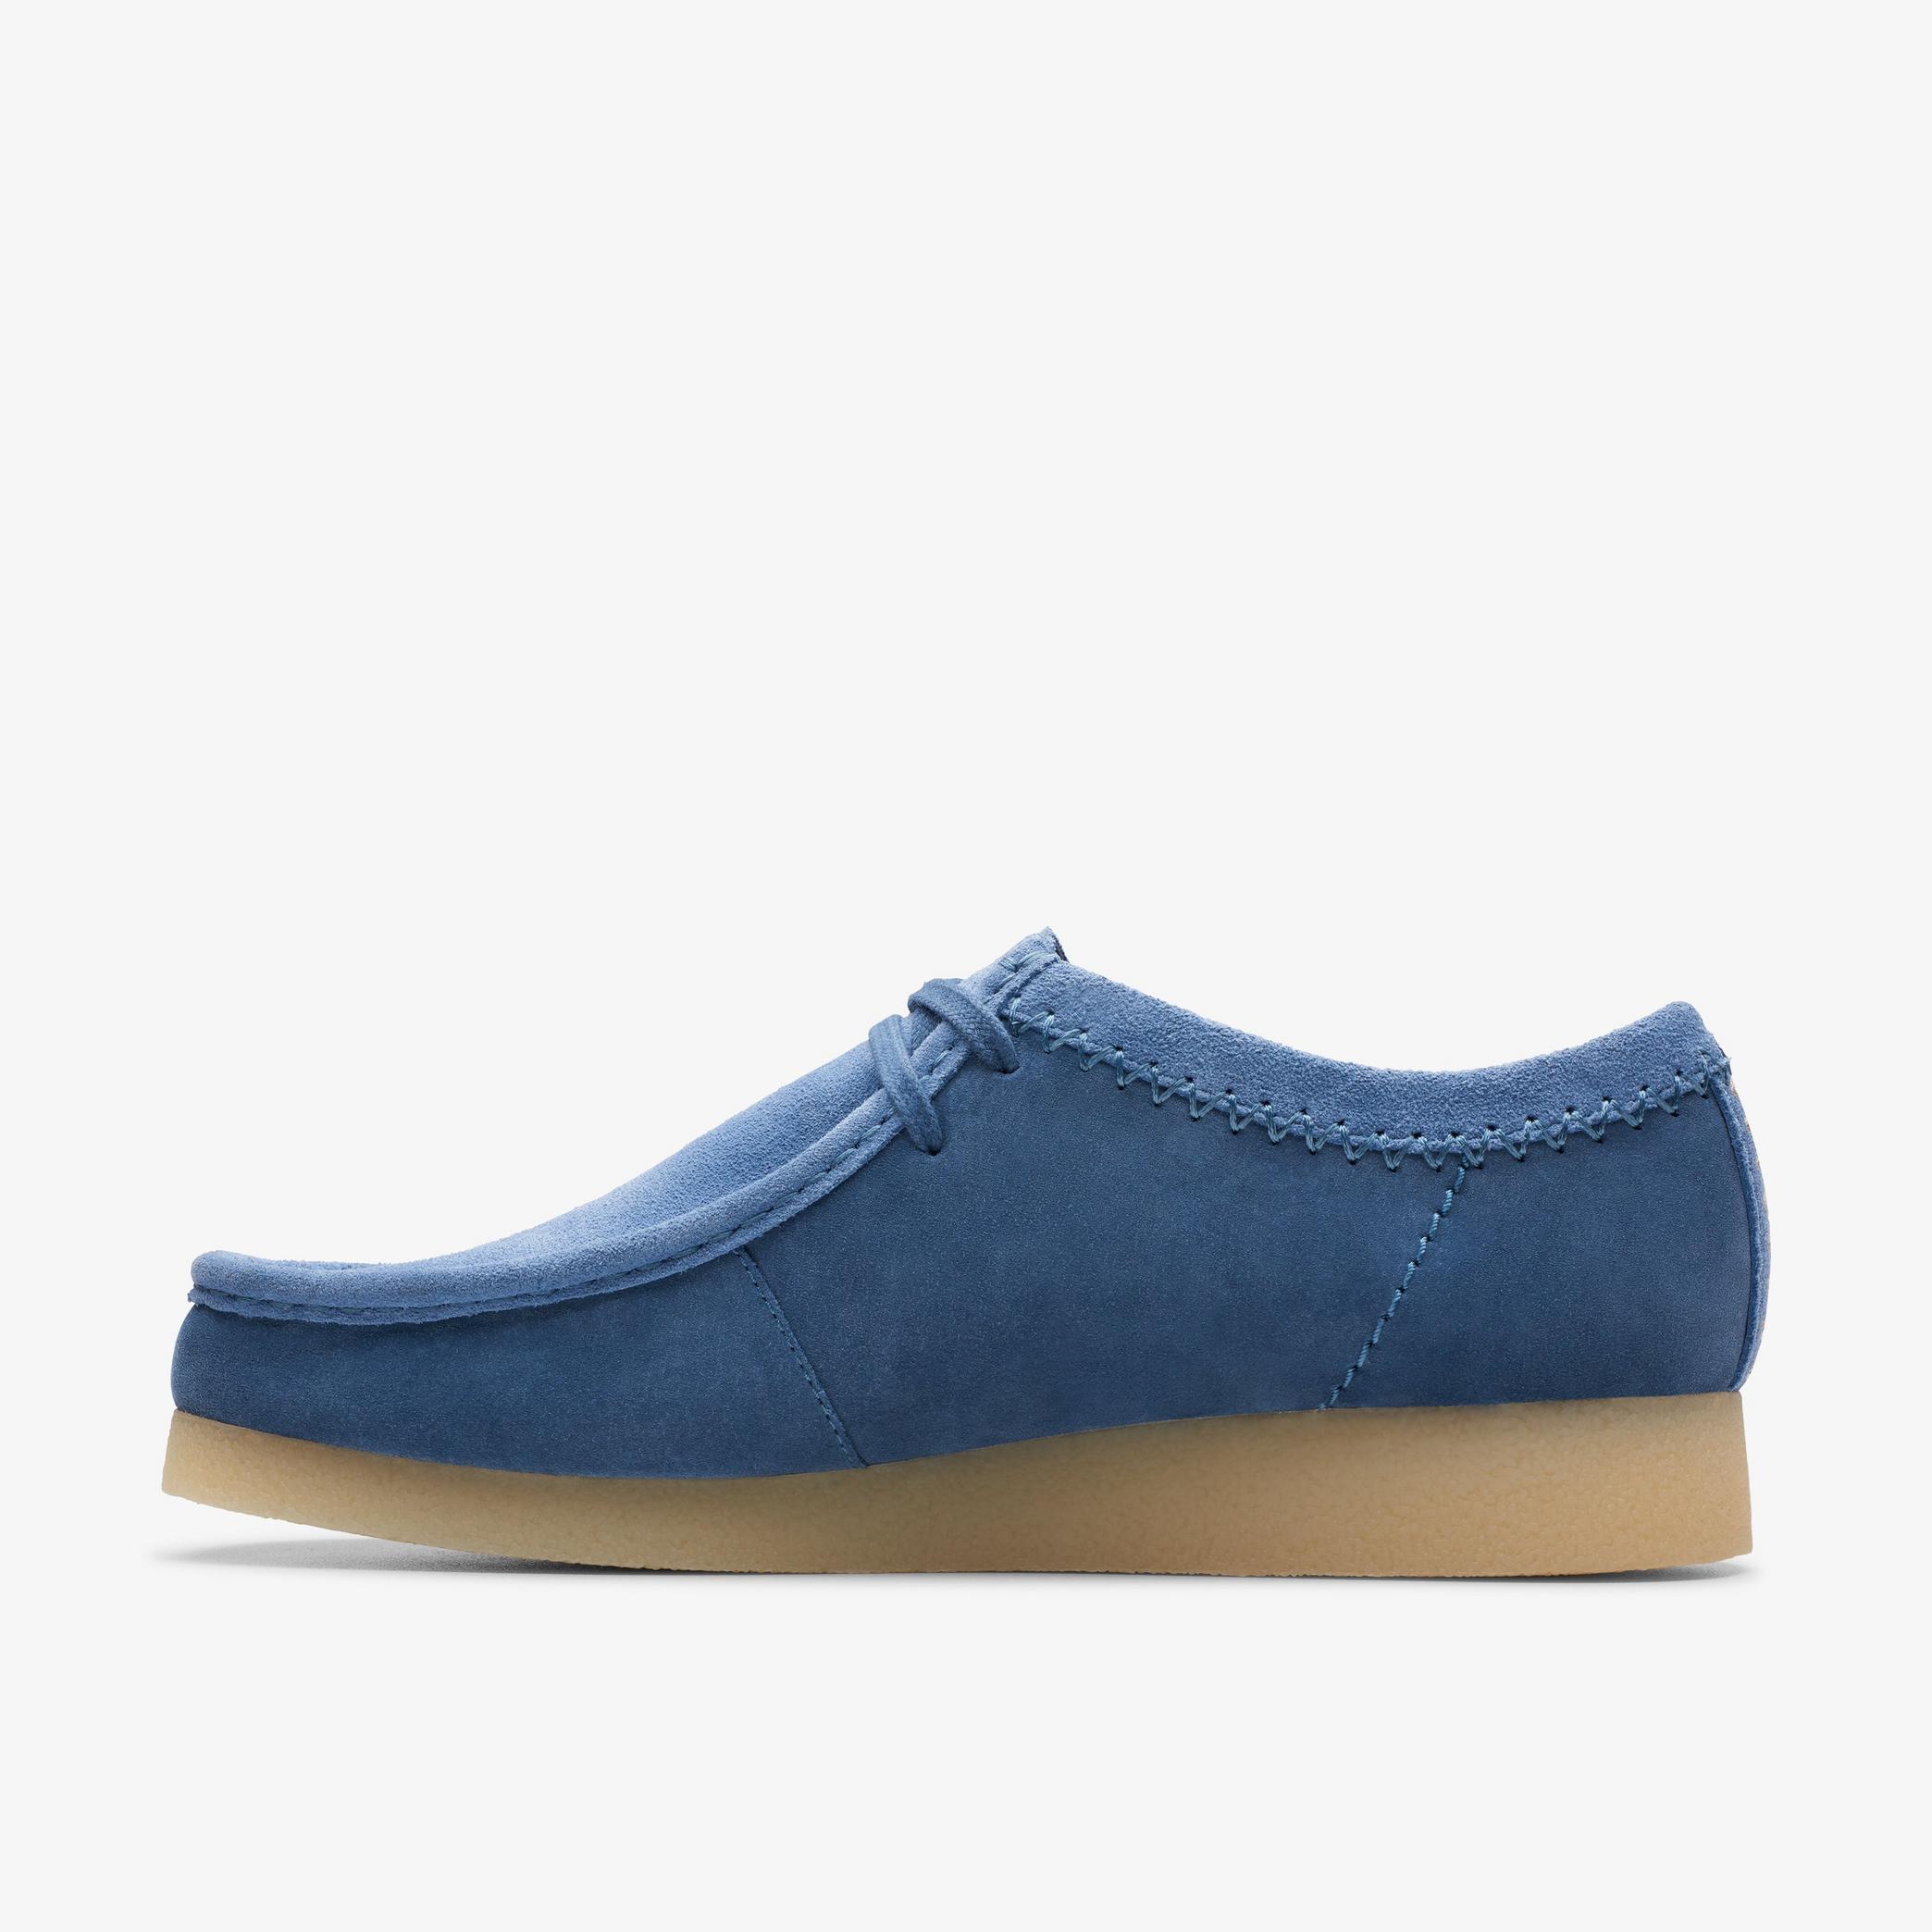 Wallabee EVO Blue Suede Moccasins, view 2 of 6